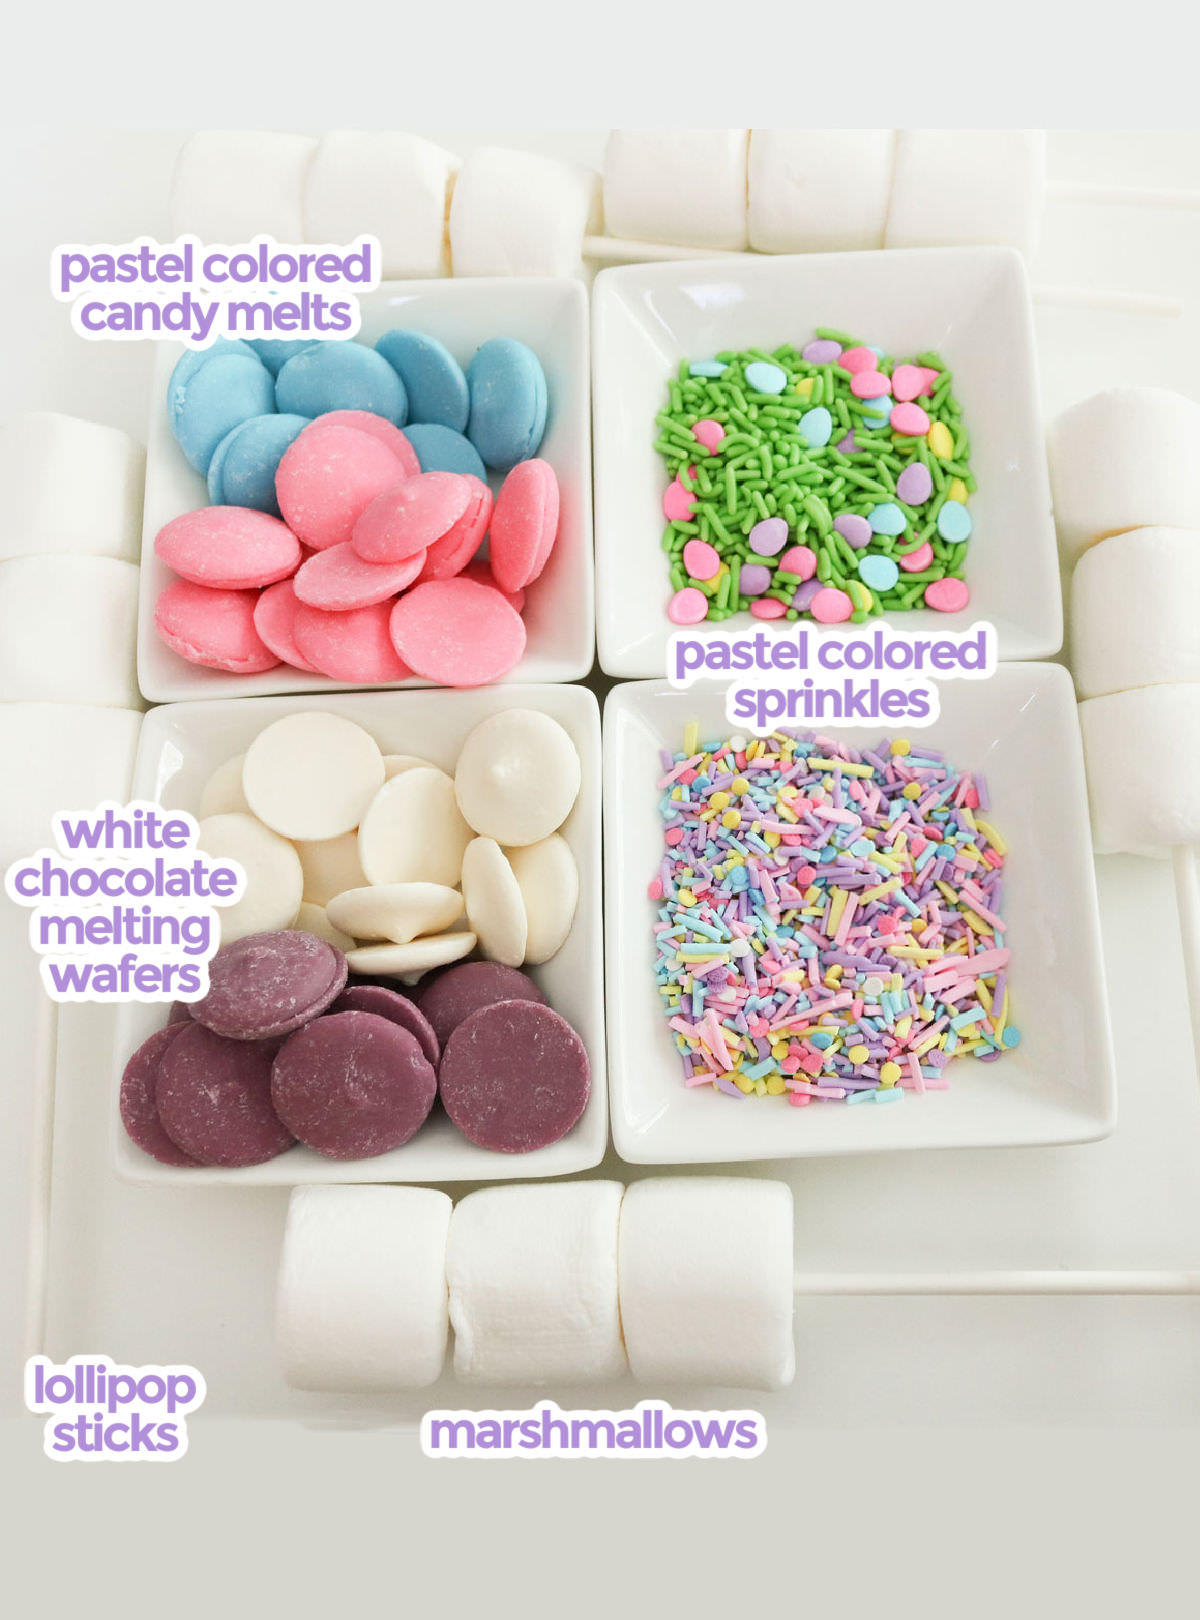 All the ingredients necessary to make Springtime Marshmallow Pops including marshmallows, lollipop sticks, candy melts, white chocolate and sprinkles.